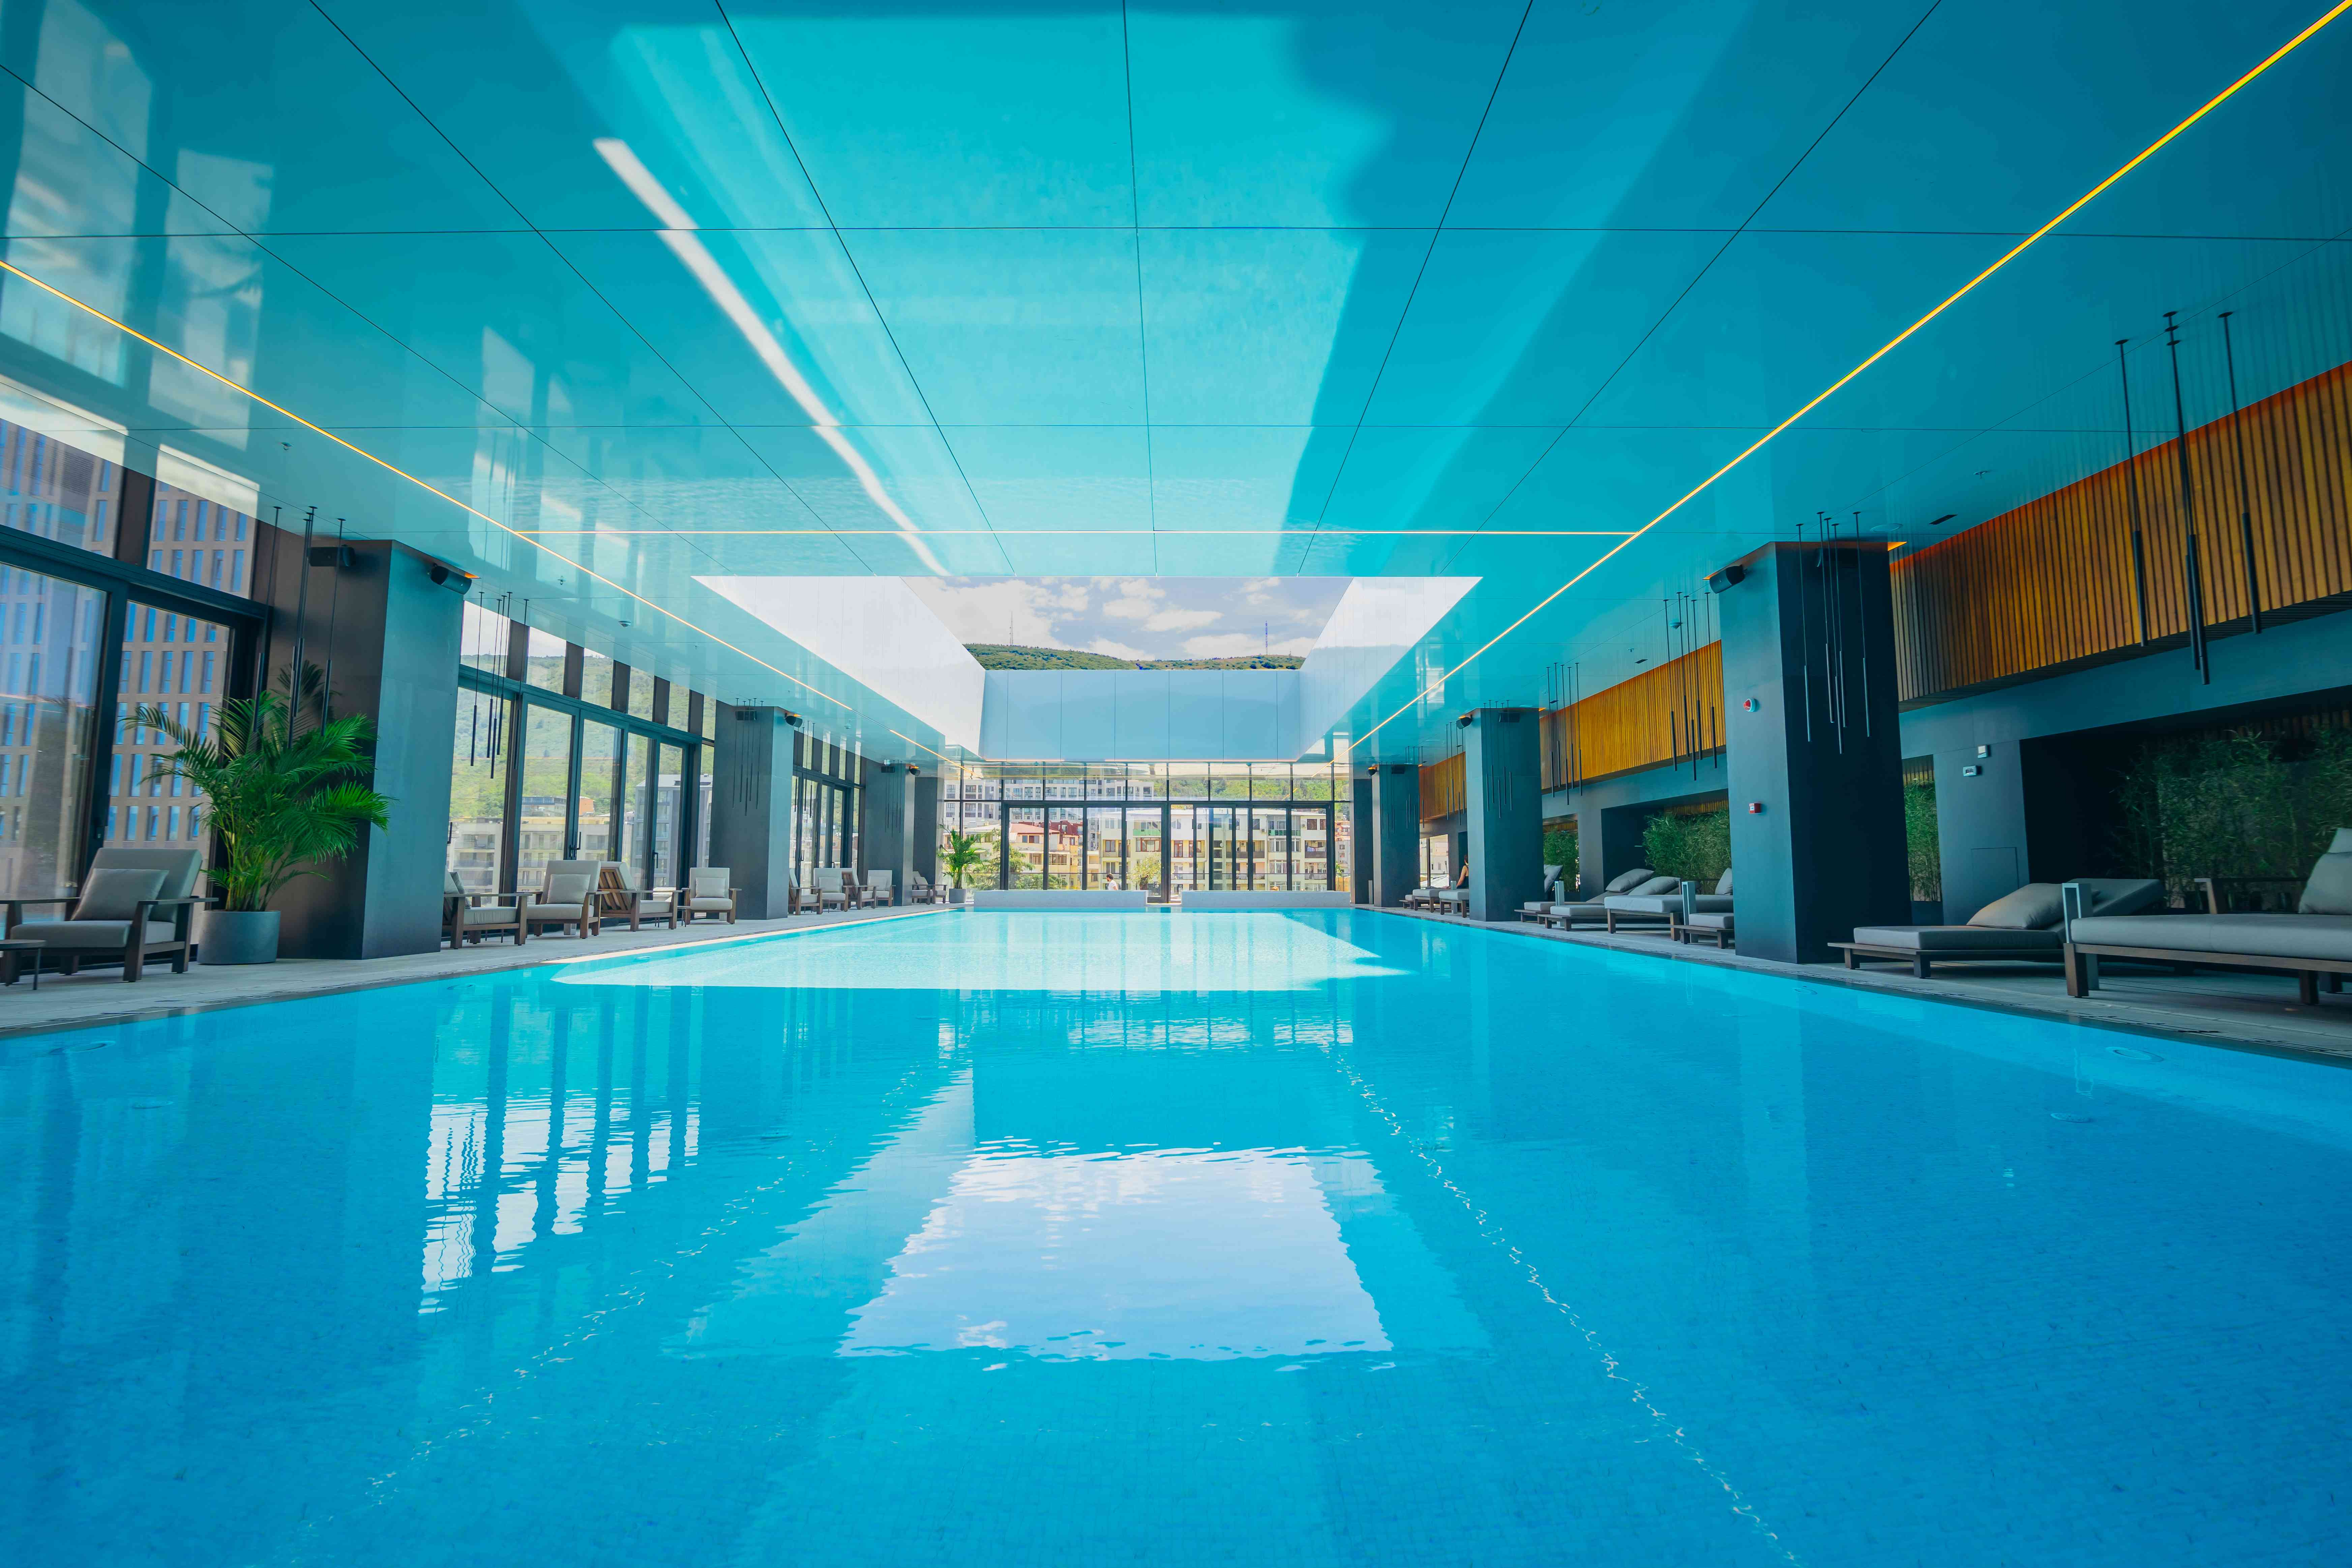 Pool Cover Image